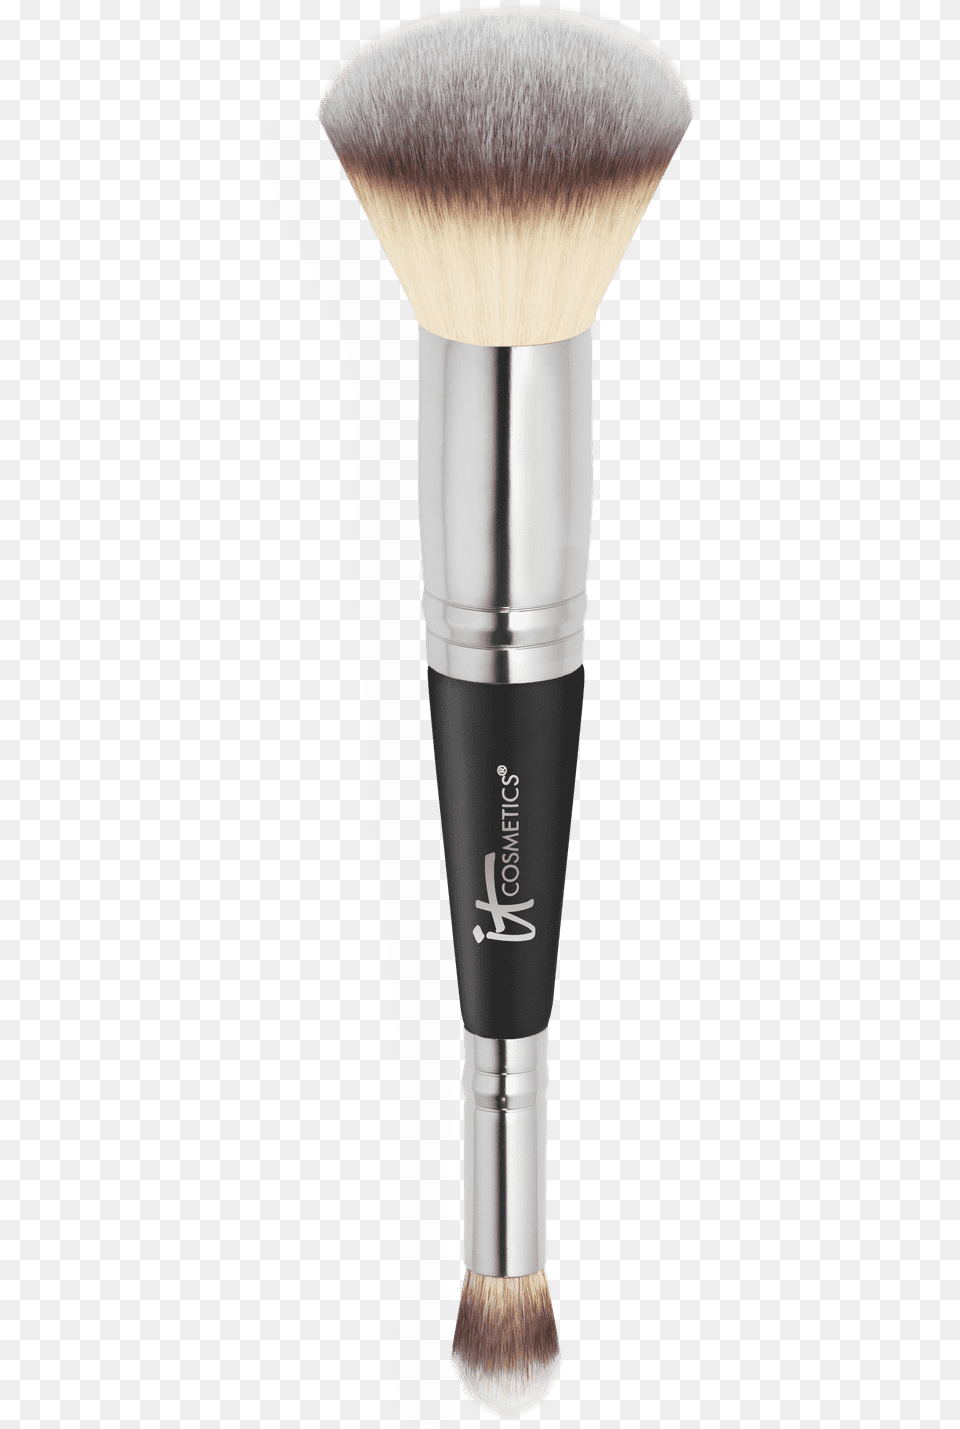 It Cosmetics Heavenly Luxe Complexion Perfection Brush Makeup Brushes, Device, Tool, Smoke Pipe Png